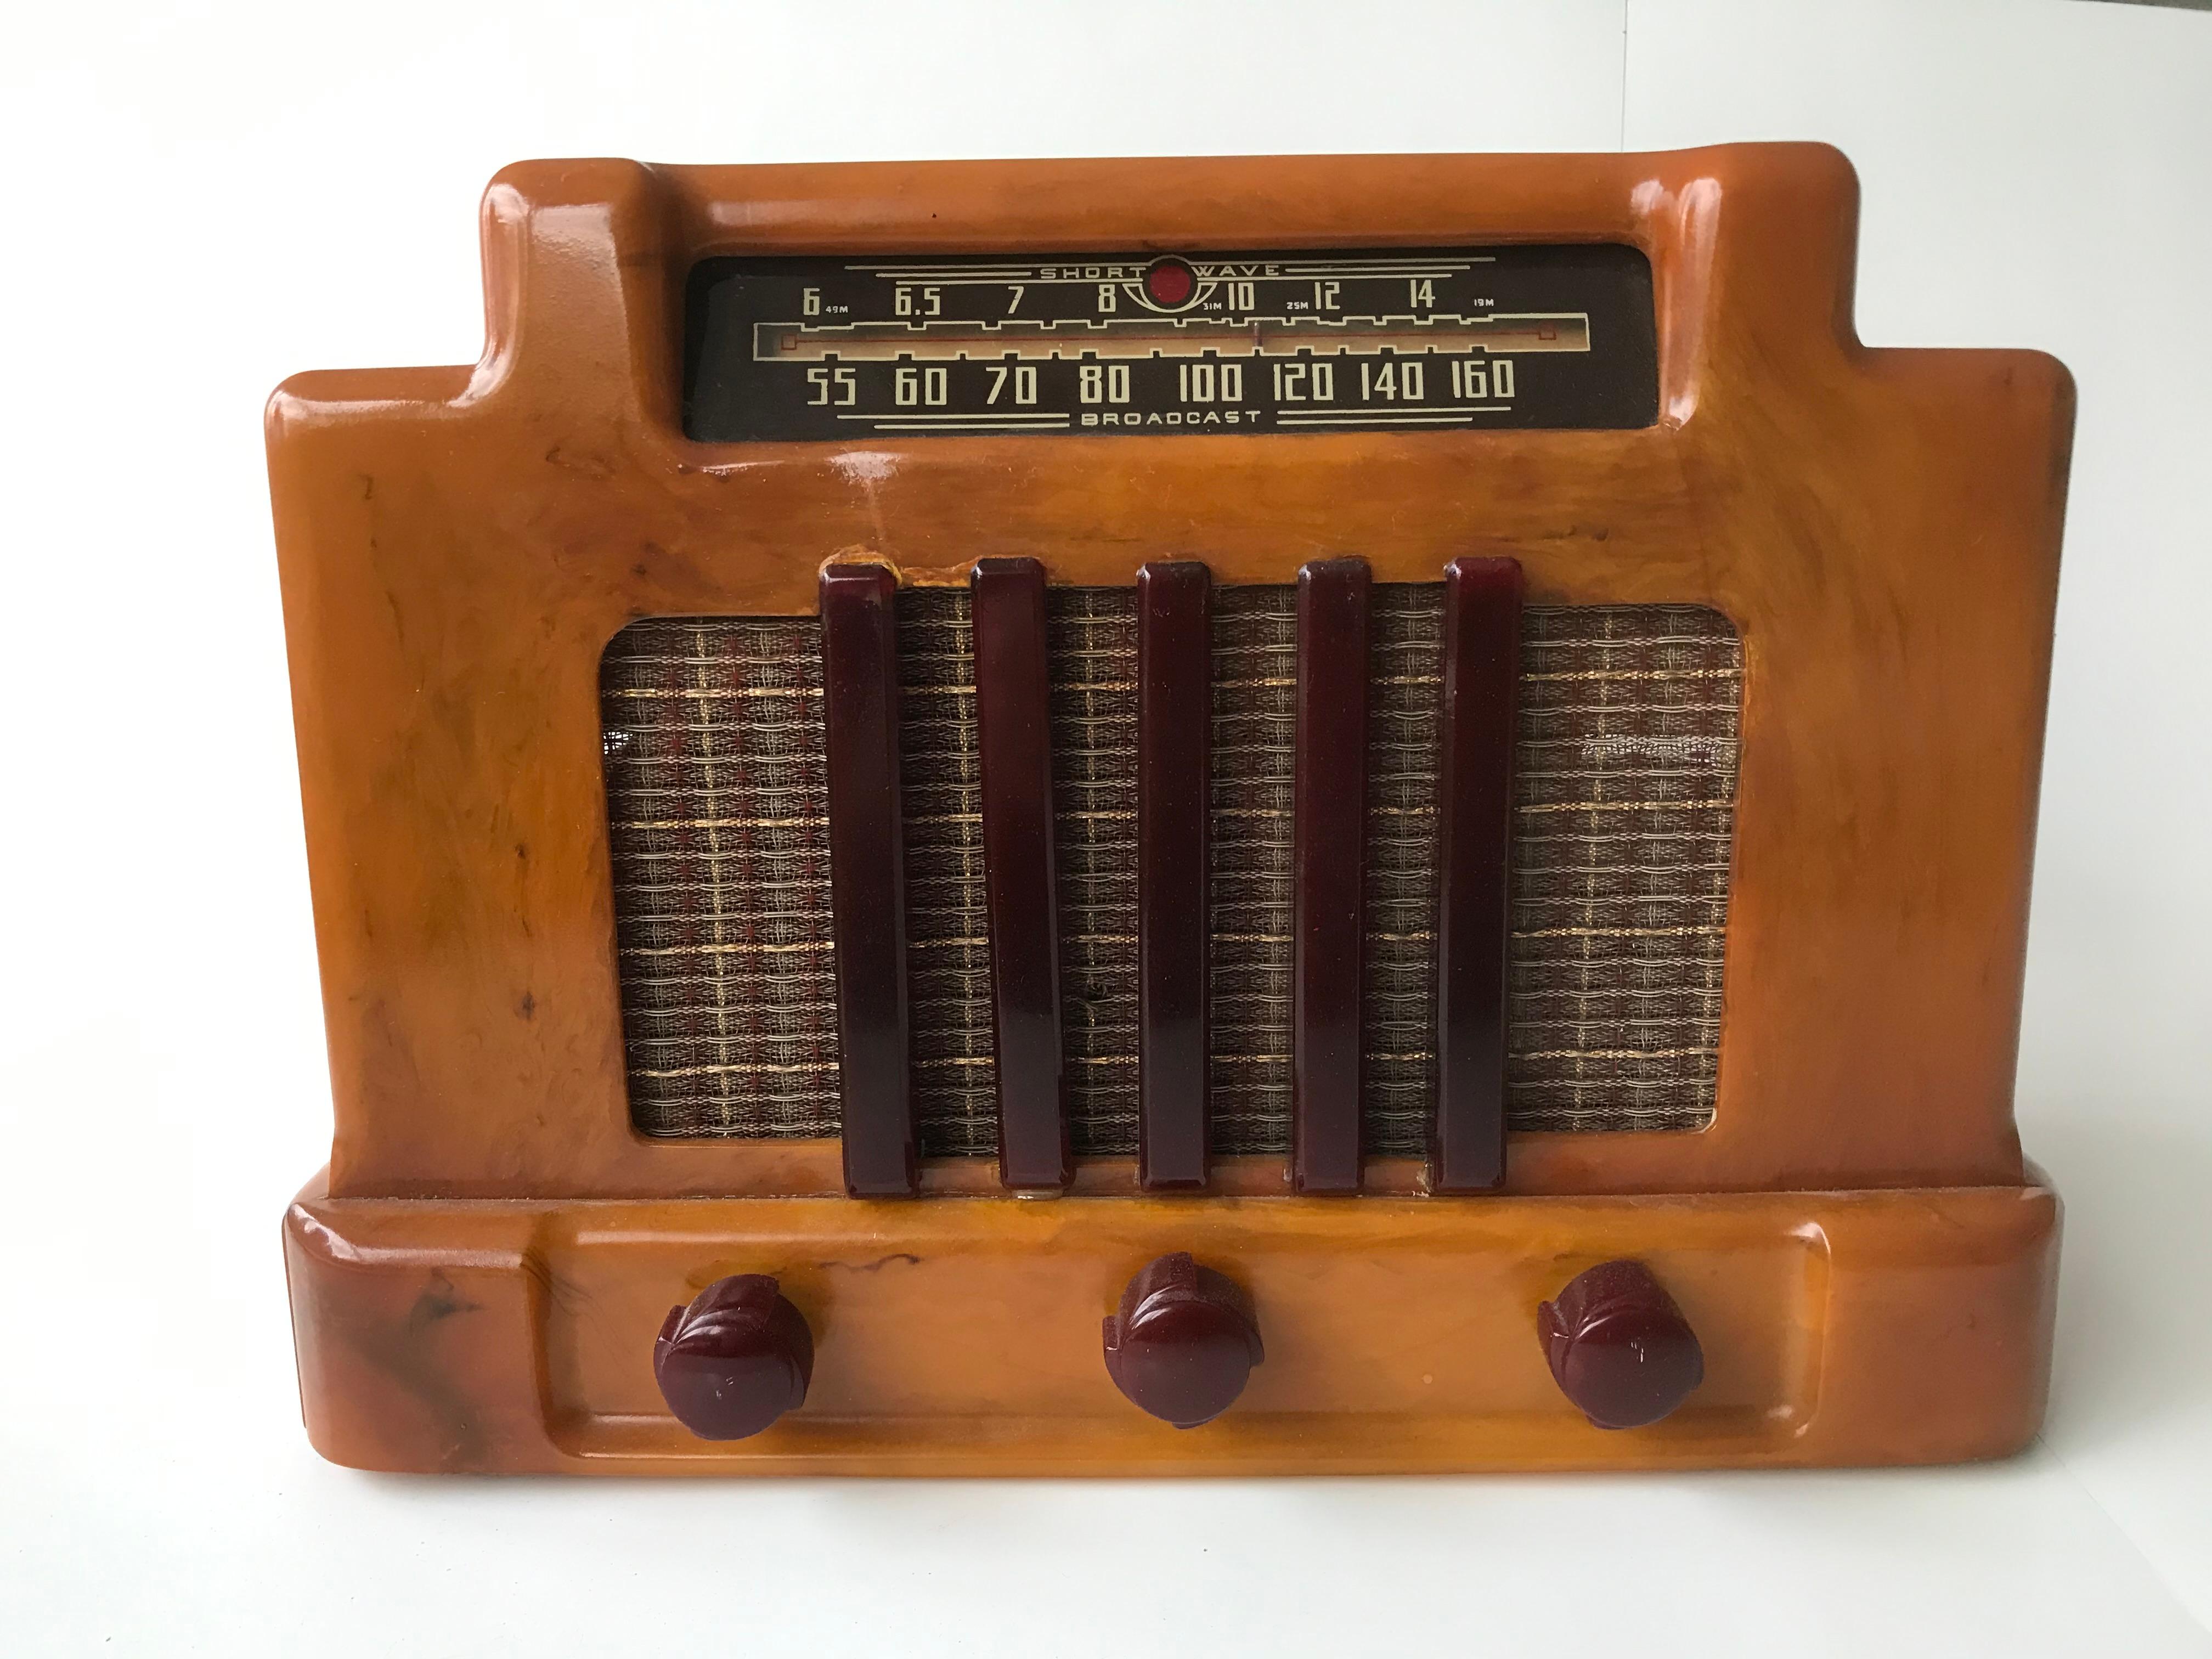 In 1939, Toronto-based Addison Industries Ltd., a Canadian company, was founded focussing on the production of commercial tube radios.  The Model 5 “Big Addison” series, featured here, resembling a courthouse or similar monumental building, was made